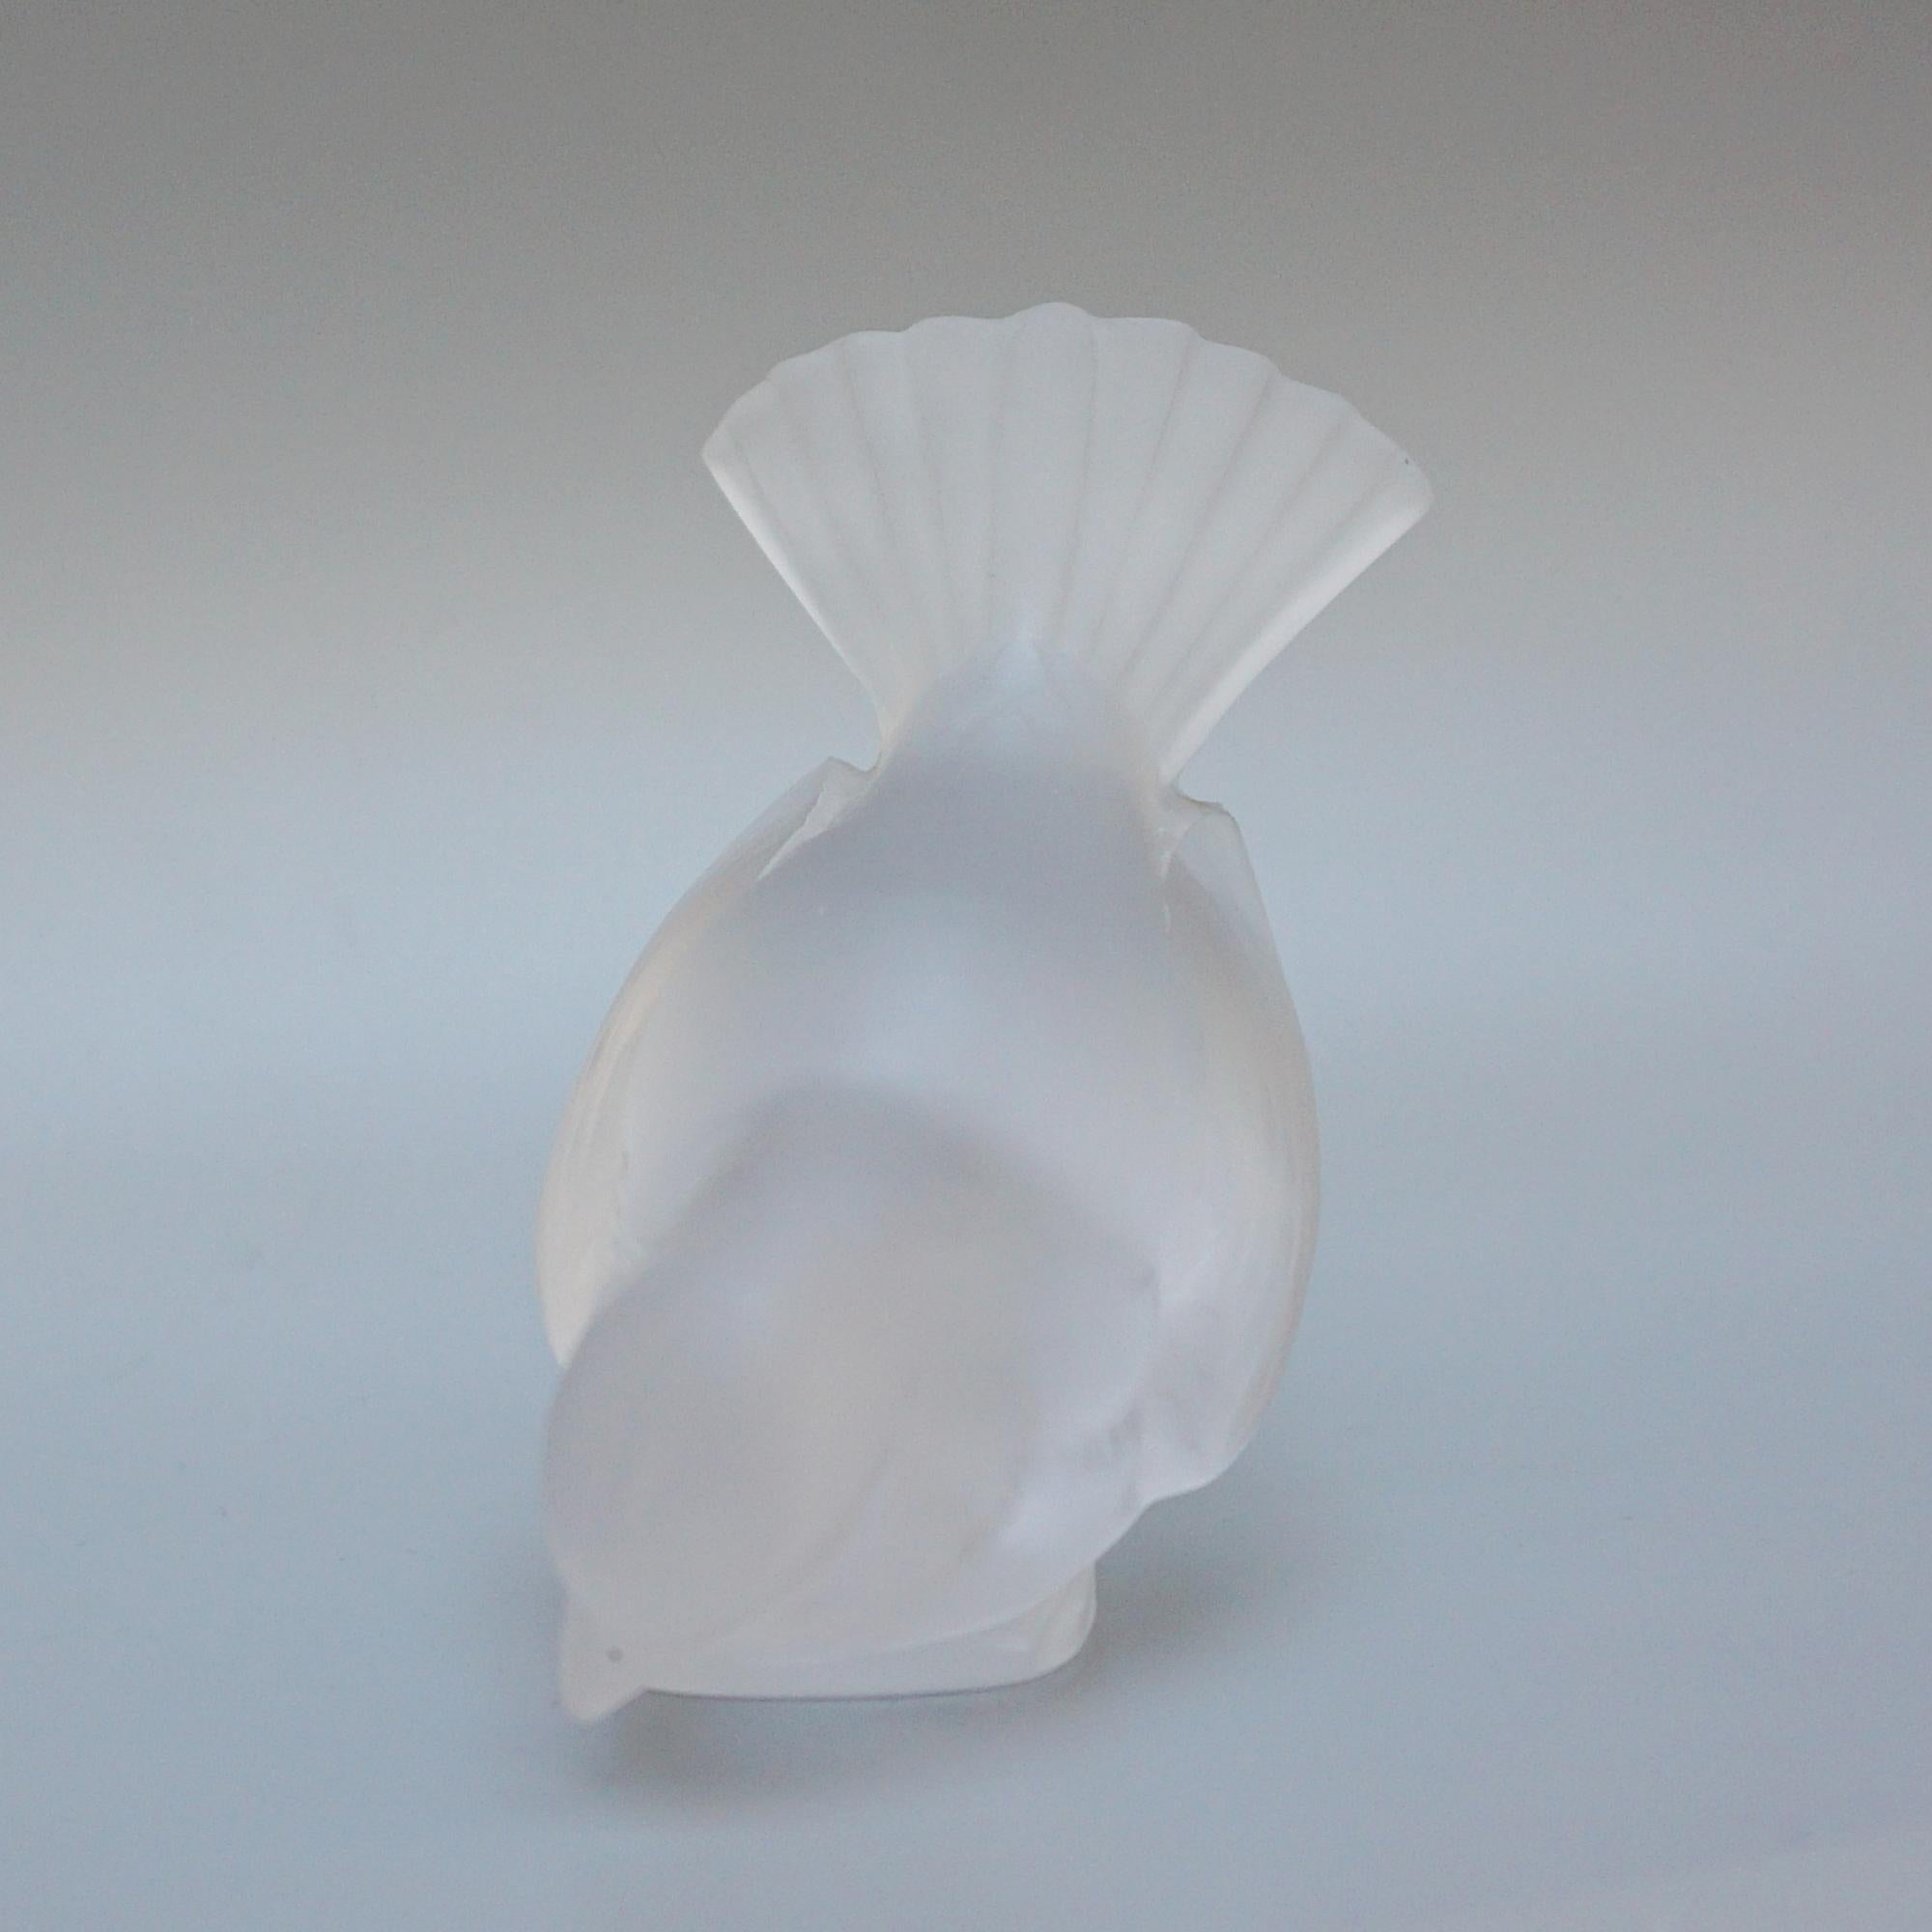 French 'Moineau Timide' A Glass Paperweight by Marc Lalique (1900 - 1977) For Sale